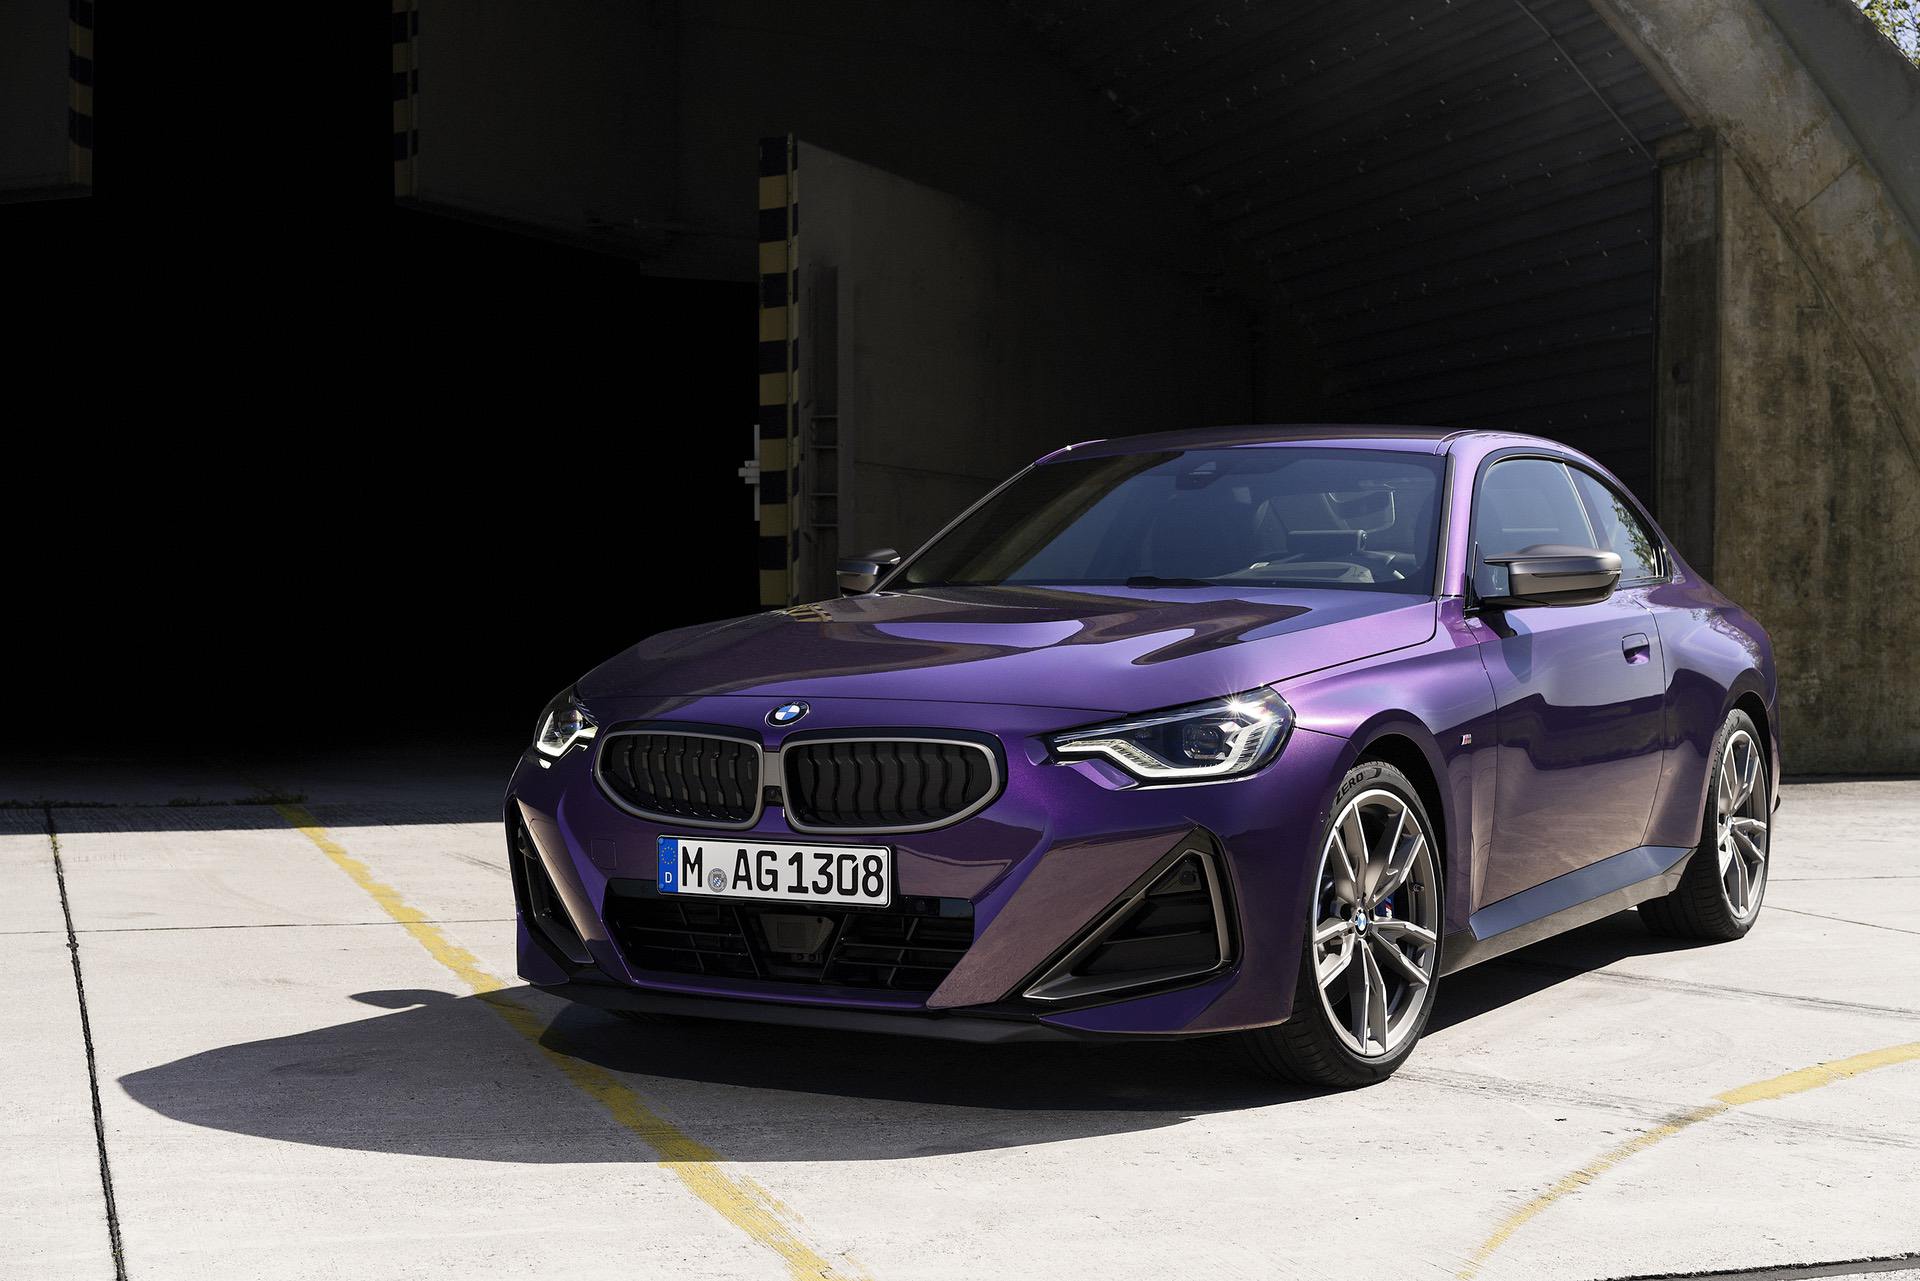 Thundernight Metallic is the Coolest BMW Color in Years | Motor Memos